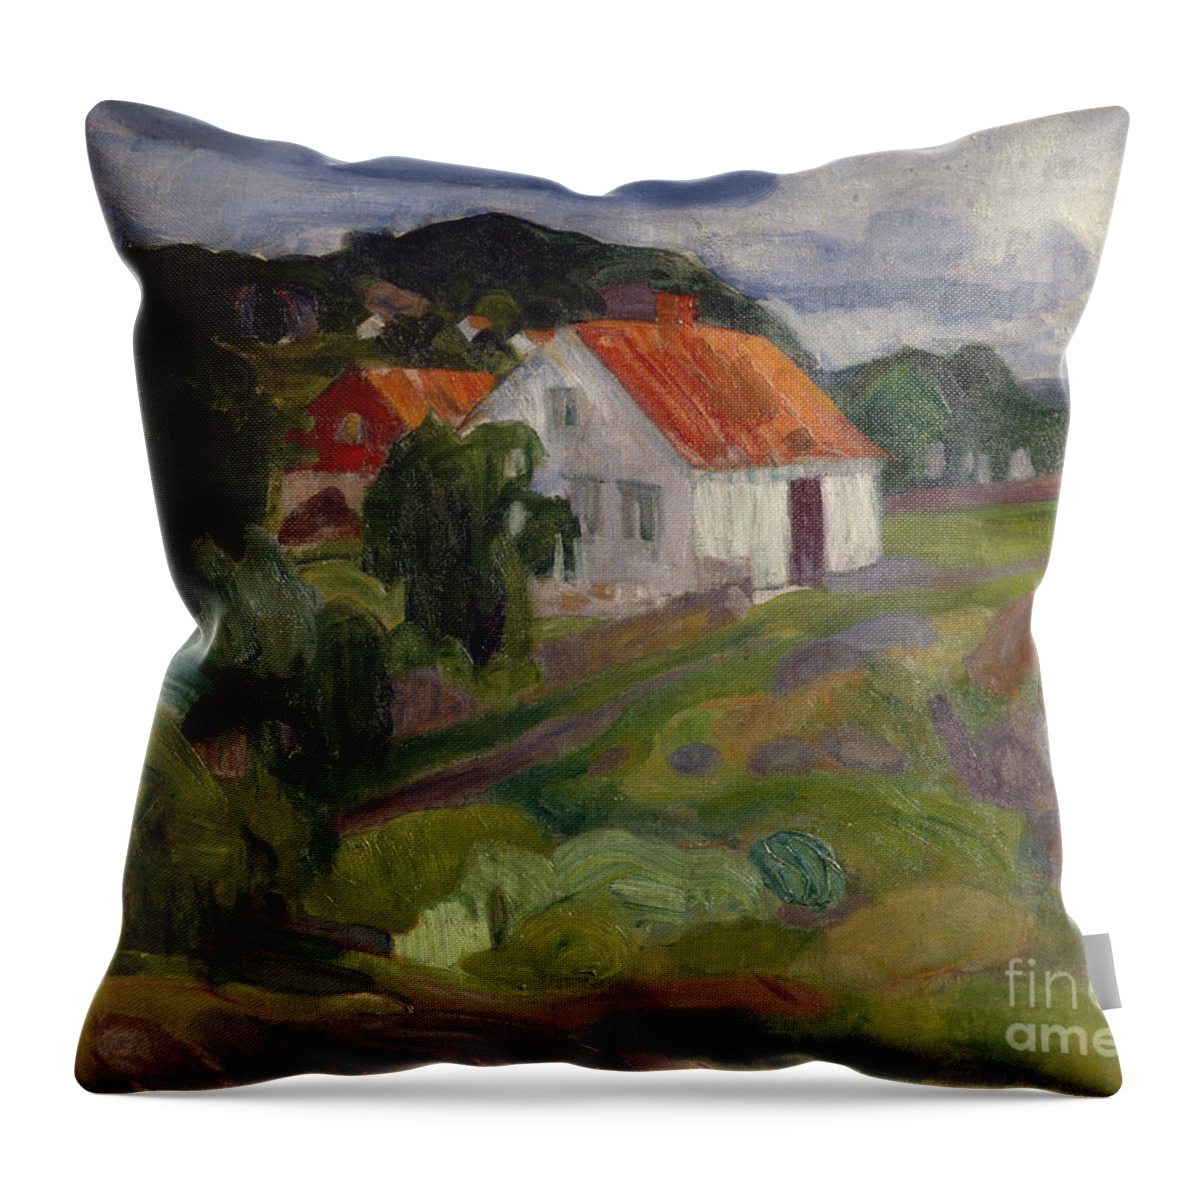 Brynjulf Larsson Throw Pillow featuring the painting Vrengen Noetteroey by O Vaering